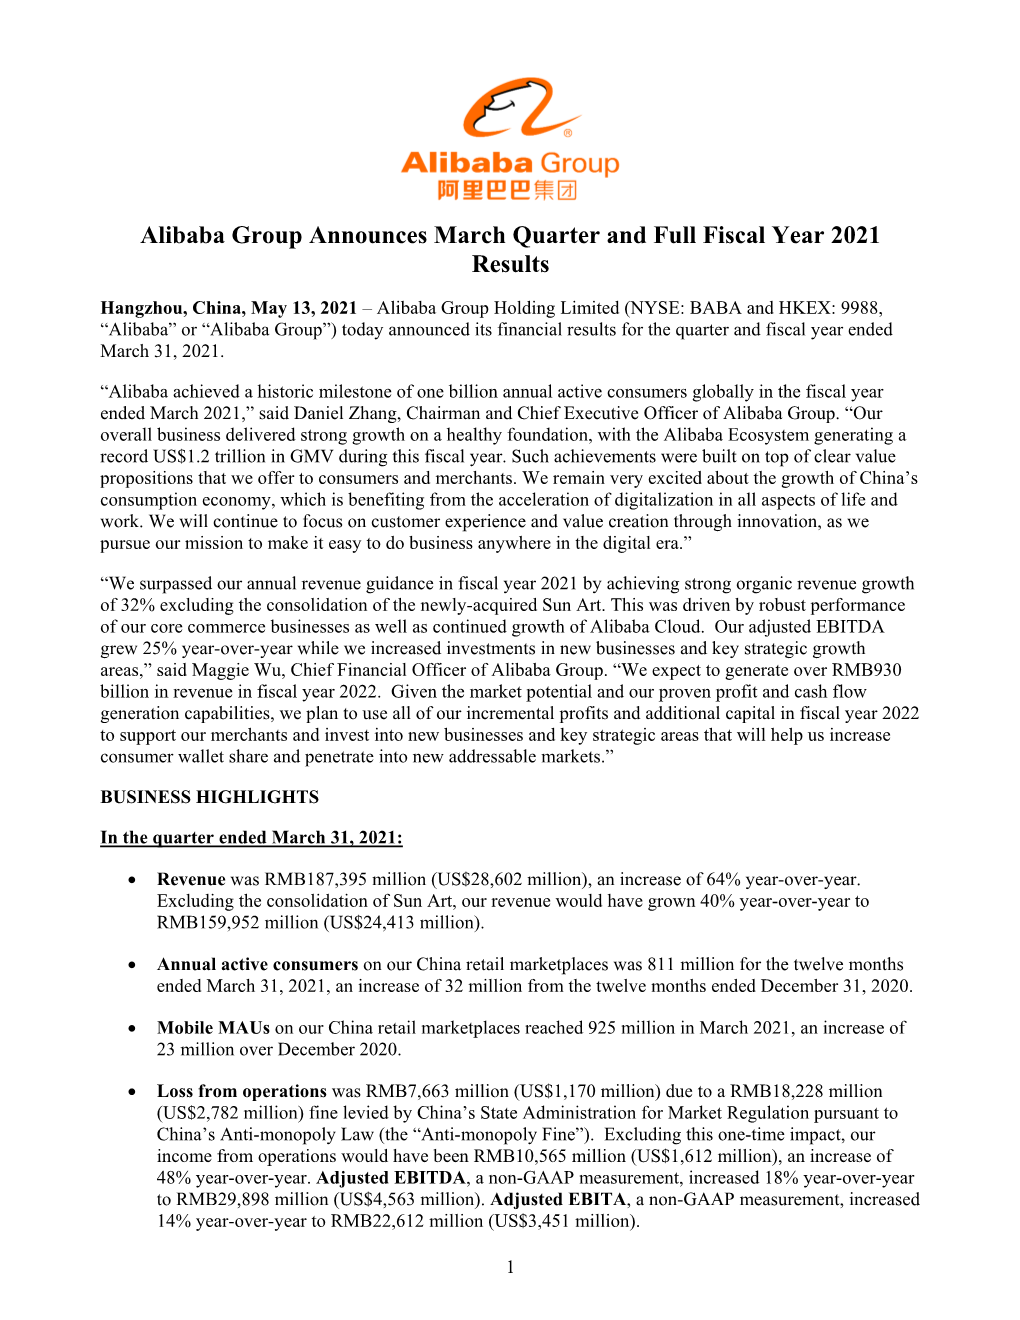 Alibaba Group Announces March Quarter and Full Fiscal Year 2021 Results